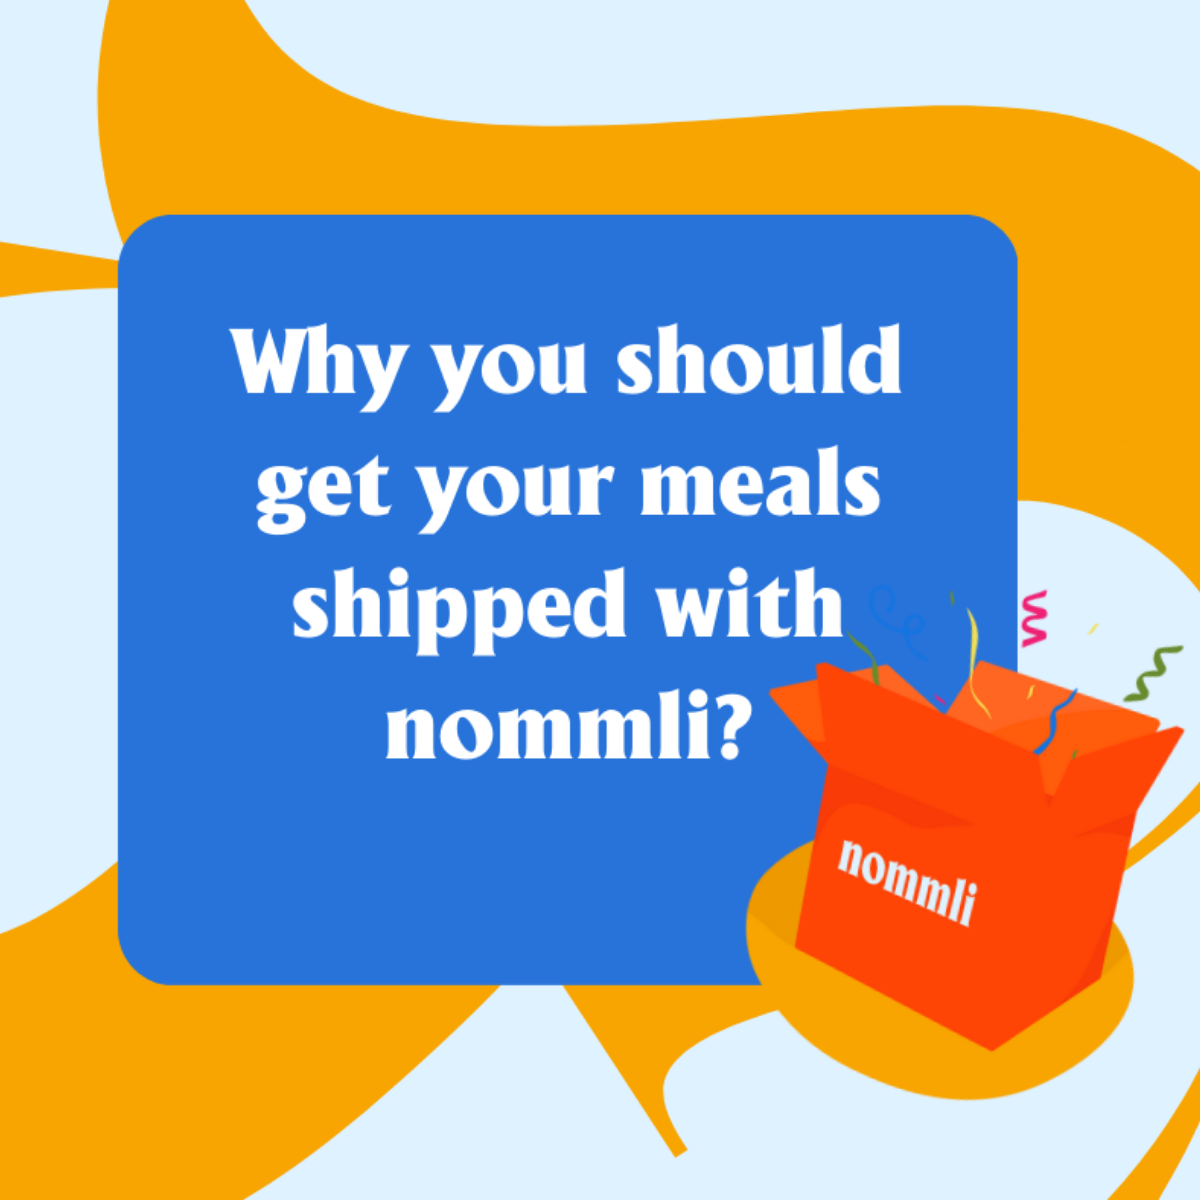 Why You Should Get Your Meals Shipped with Nommli?